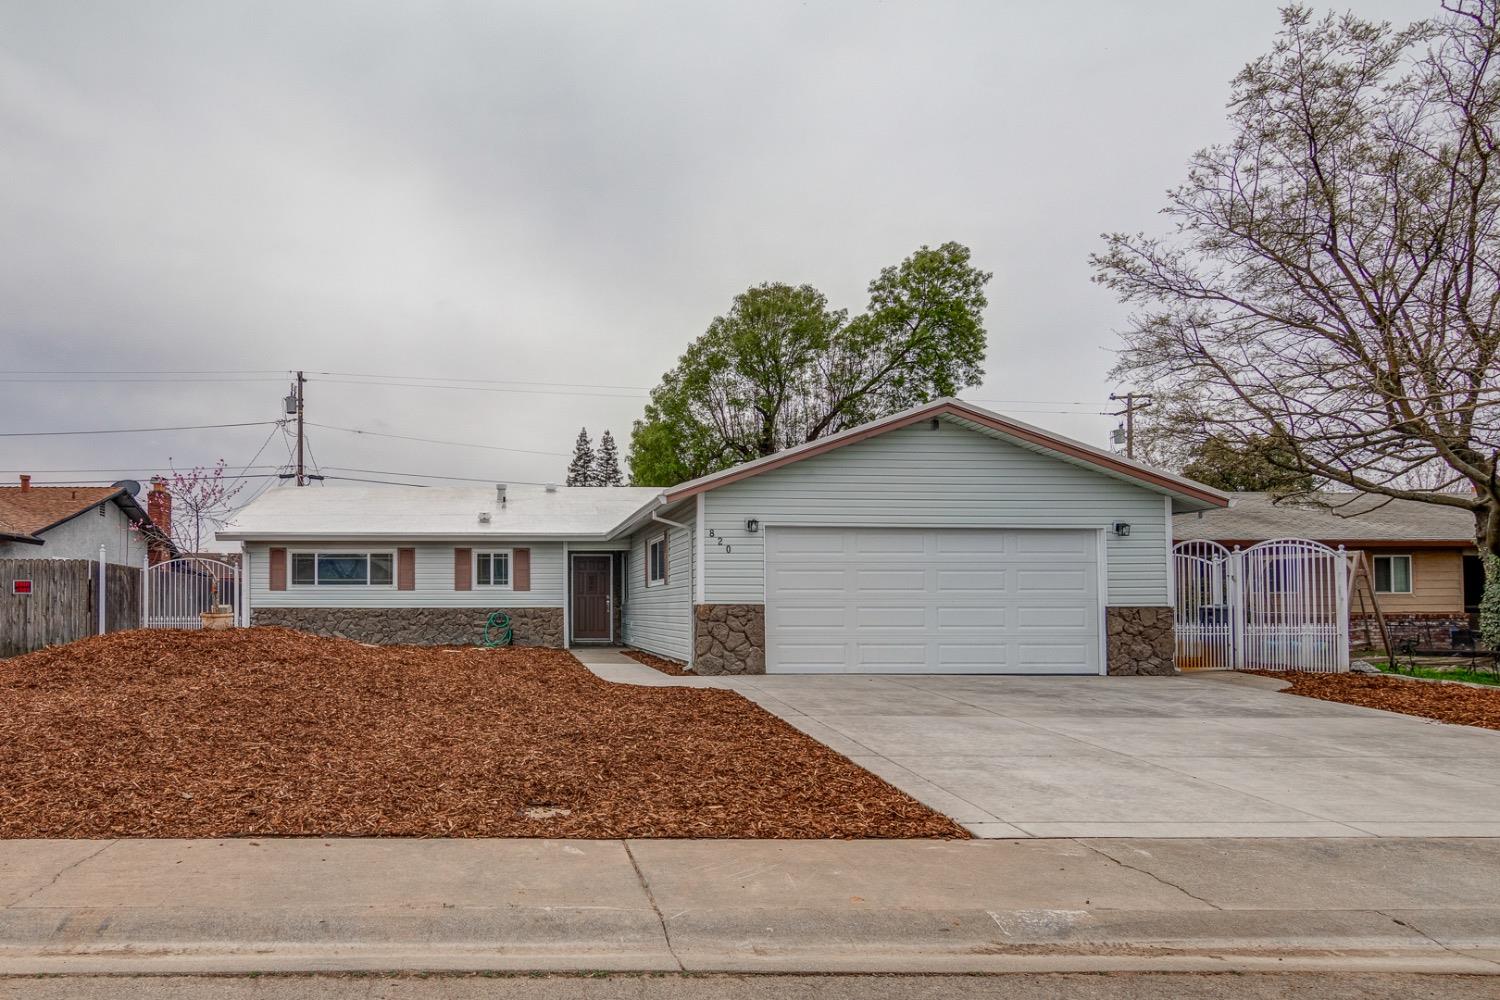 Photo of 820 Toddwick Ave in Marysville, CA